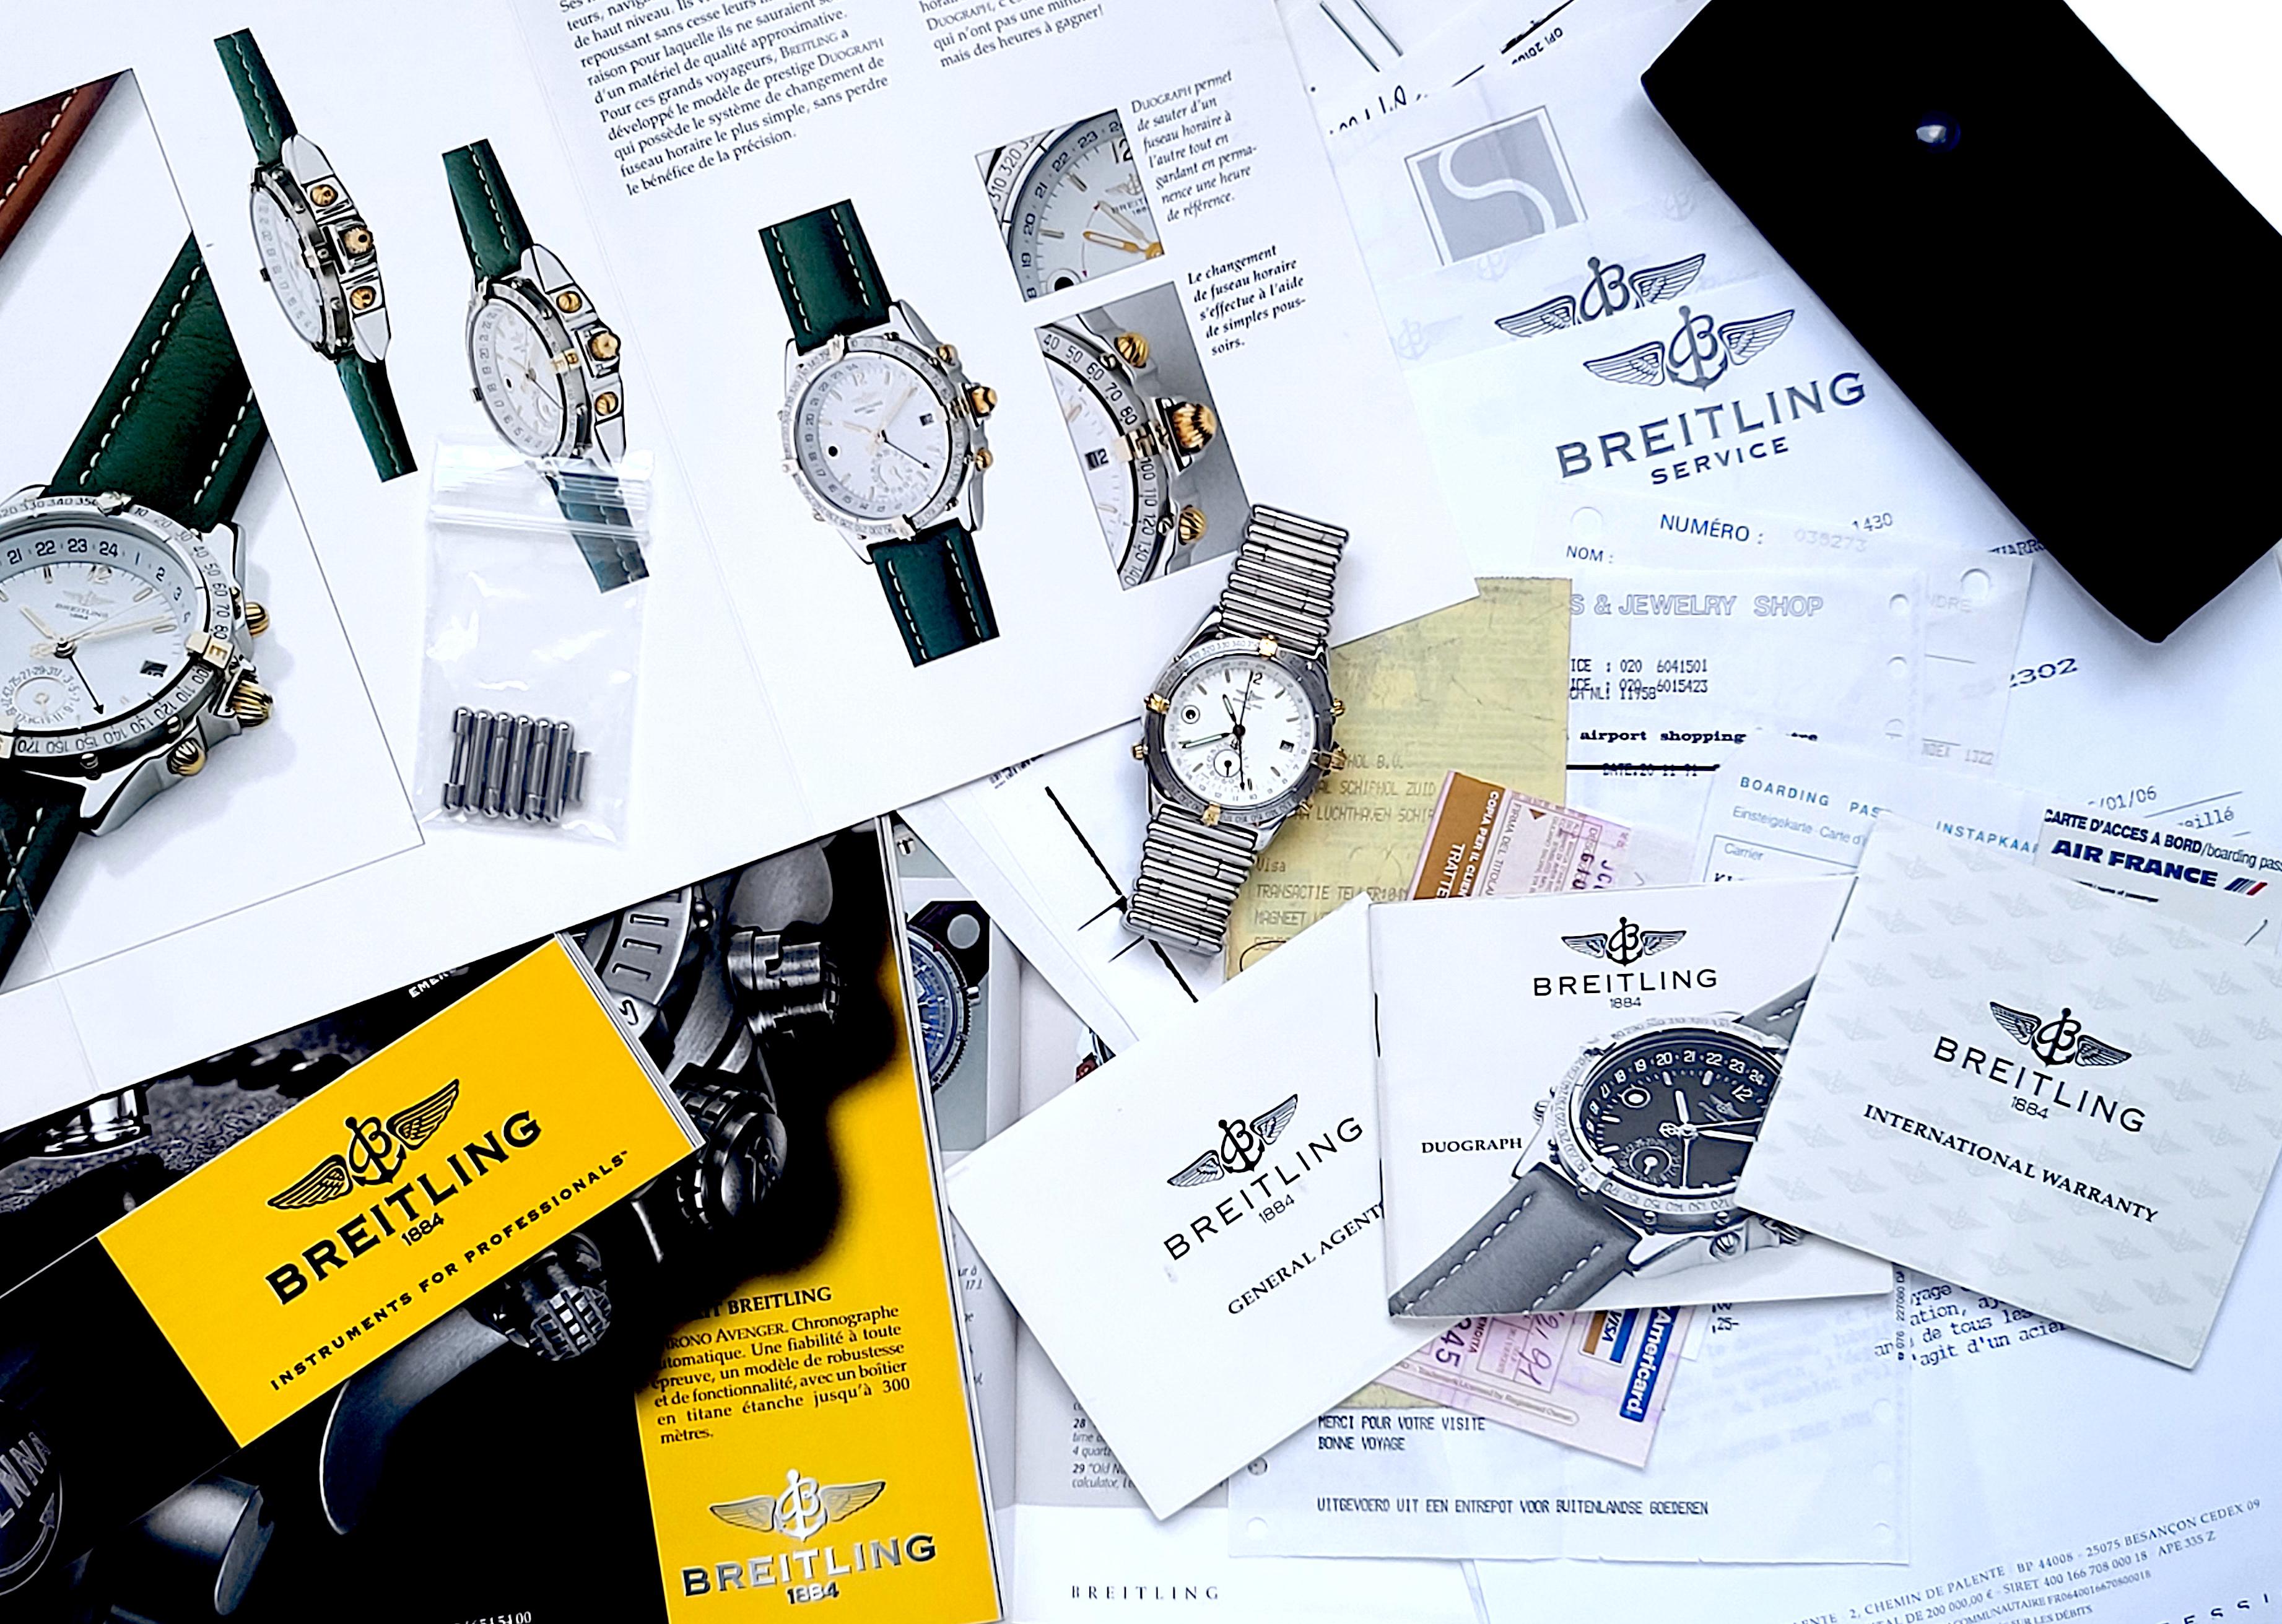 BREITLING 
Founded in 1884

for the discerning Gentlemen

The company was founded in 1884 by Léon Breitling in Saint-Imier, Switzerland. Breitling is known for precision-made chronometers designed for aviators.

Wear Girard Perregaux watch it's